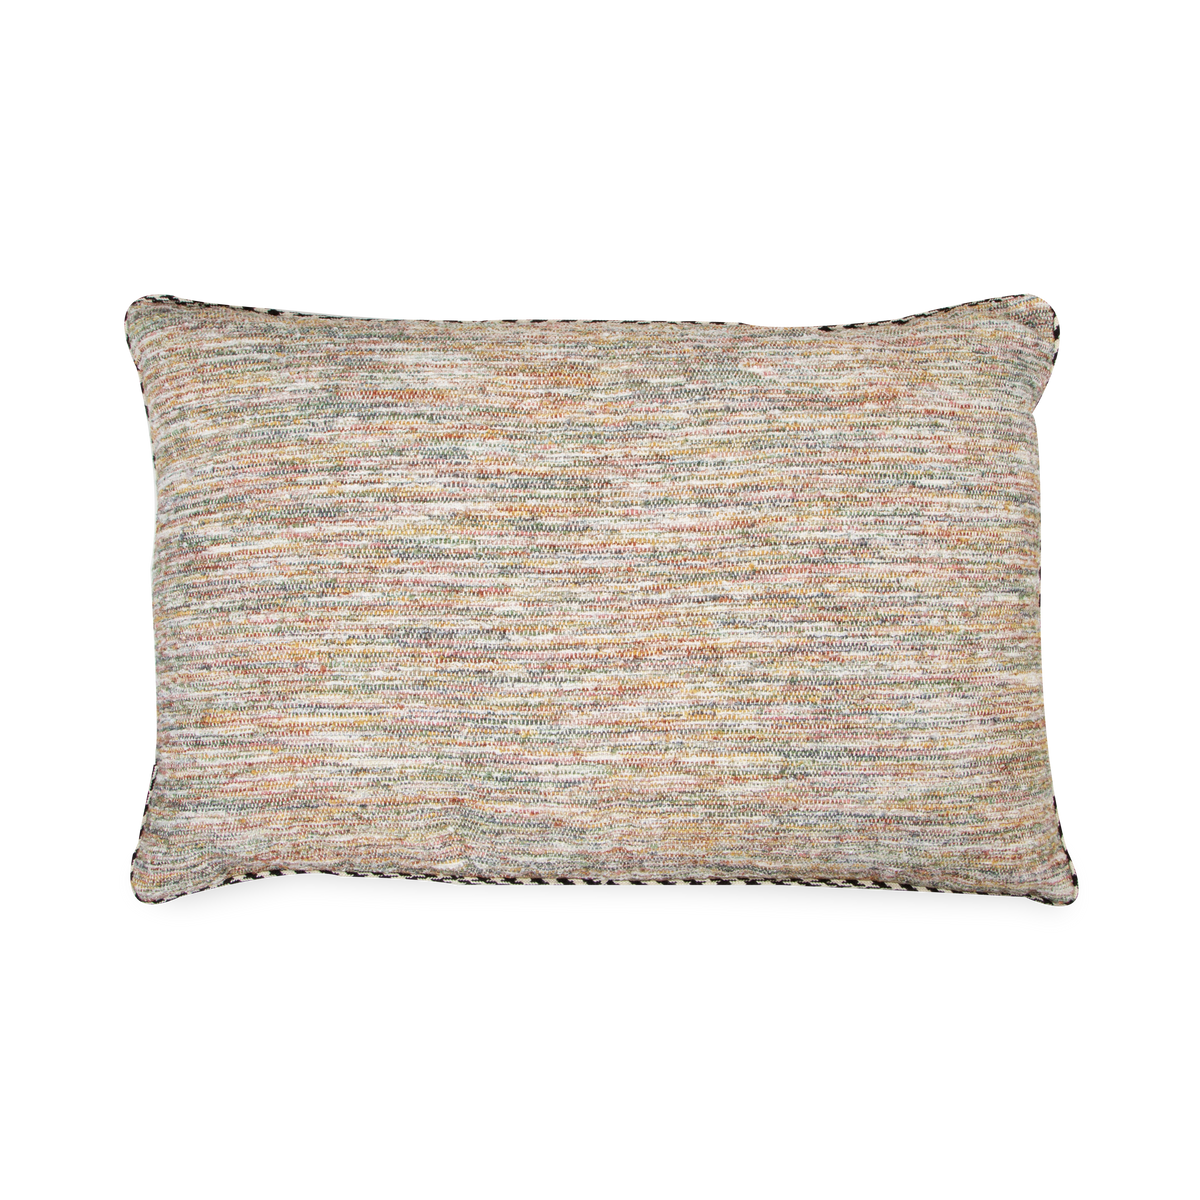 With the use of a dense bunching of paintbrush-like strokes, the Textured Piping Pillow plays with a sense of movement and depth.